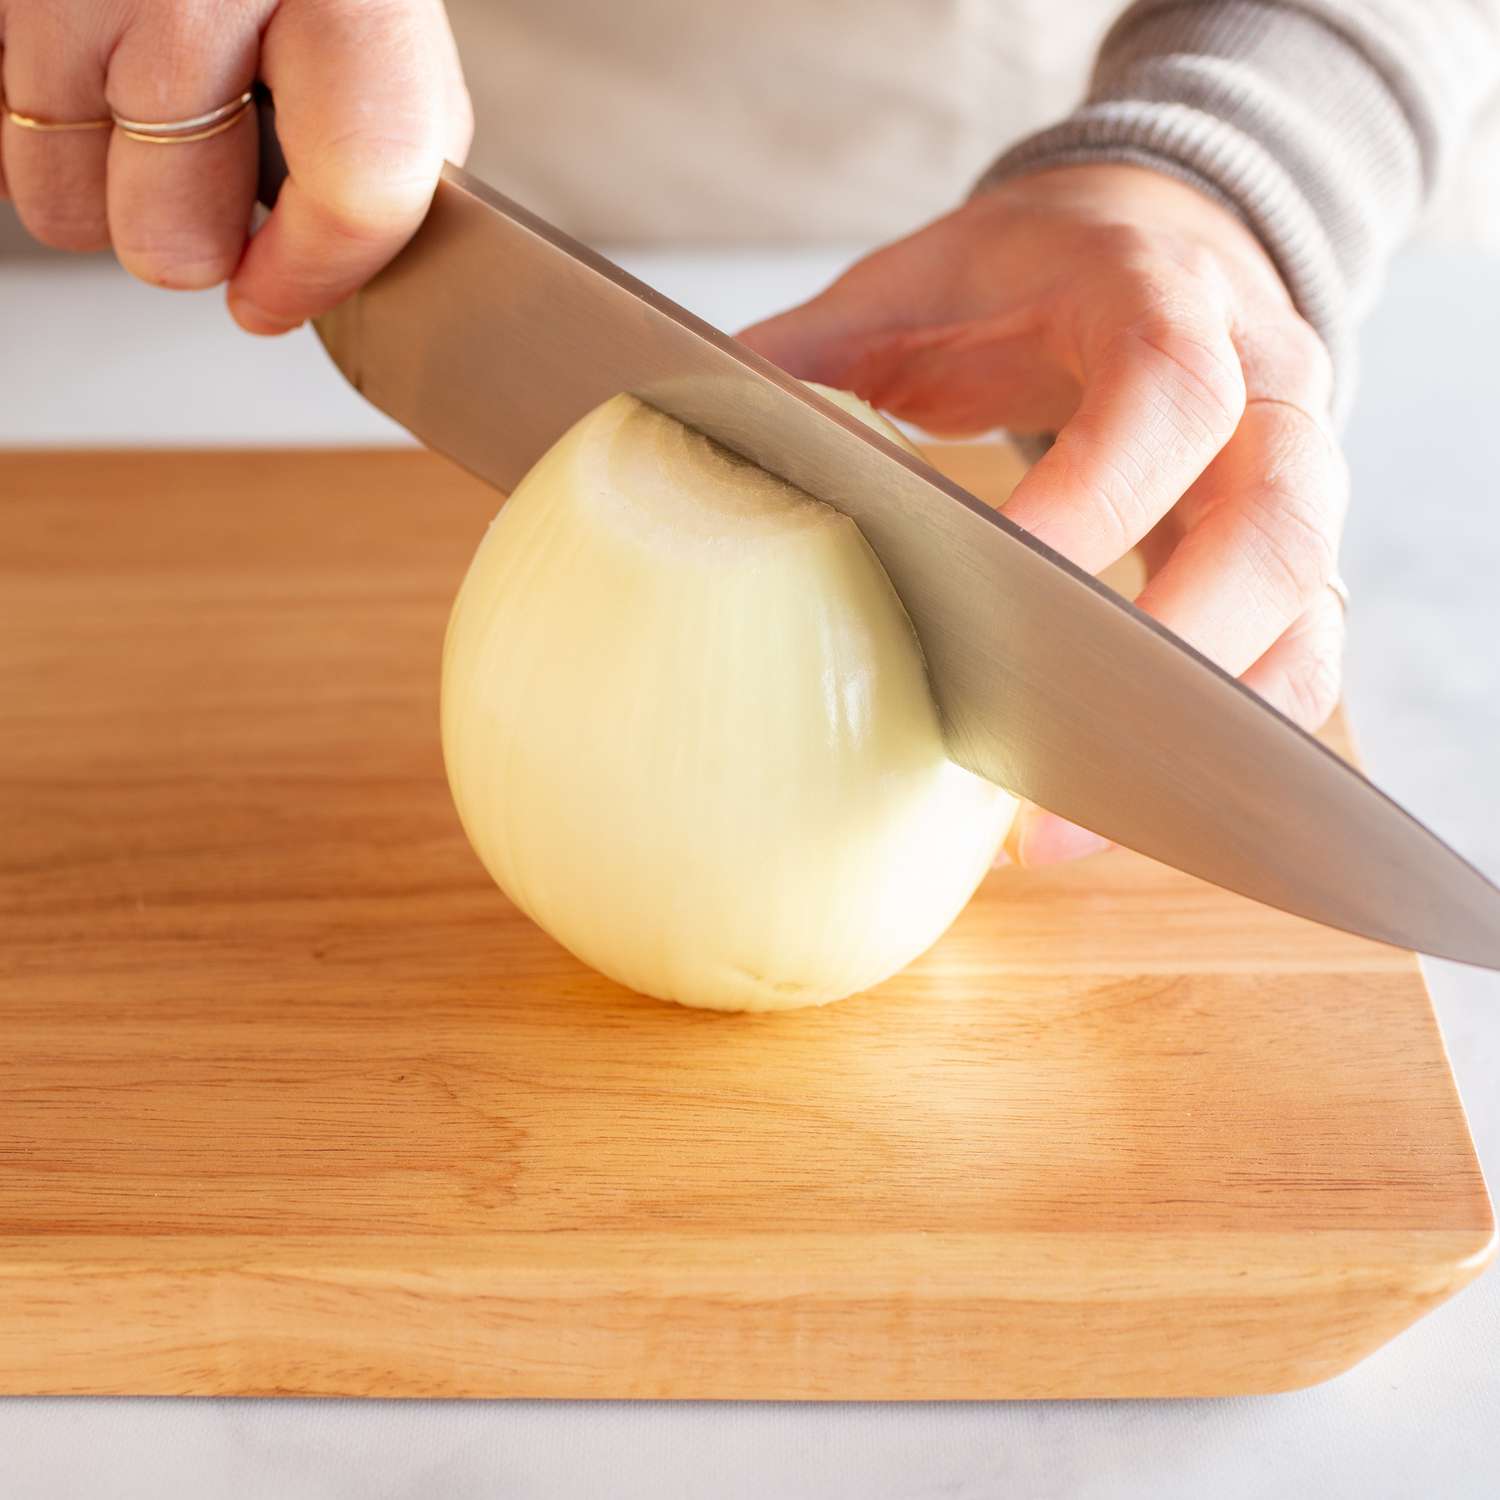 Close up of a knife being used to cut an onion in half